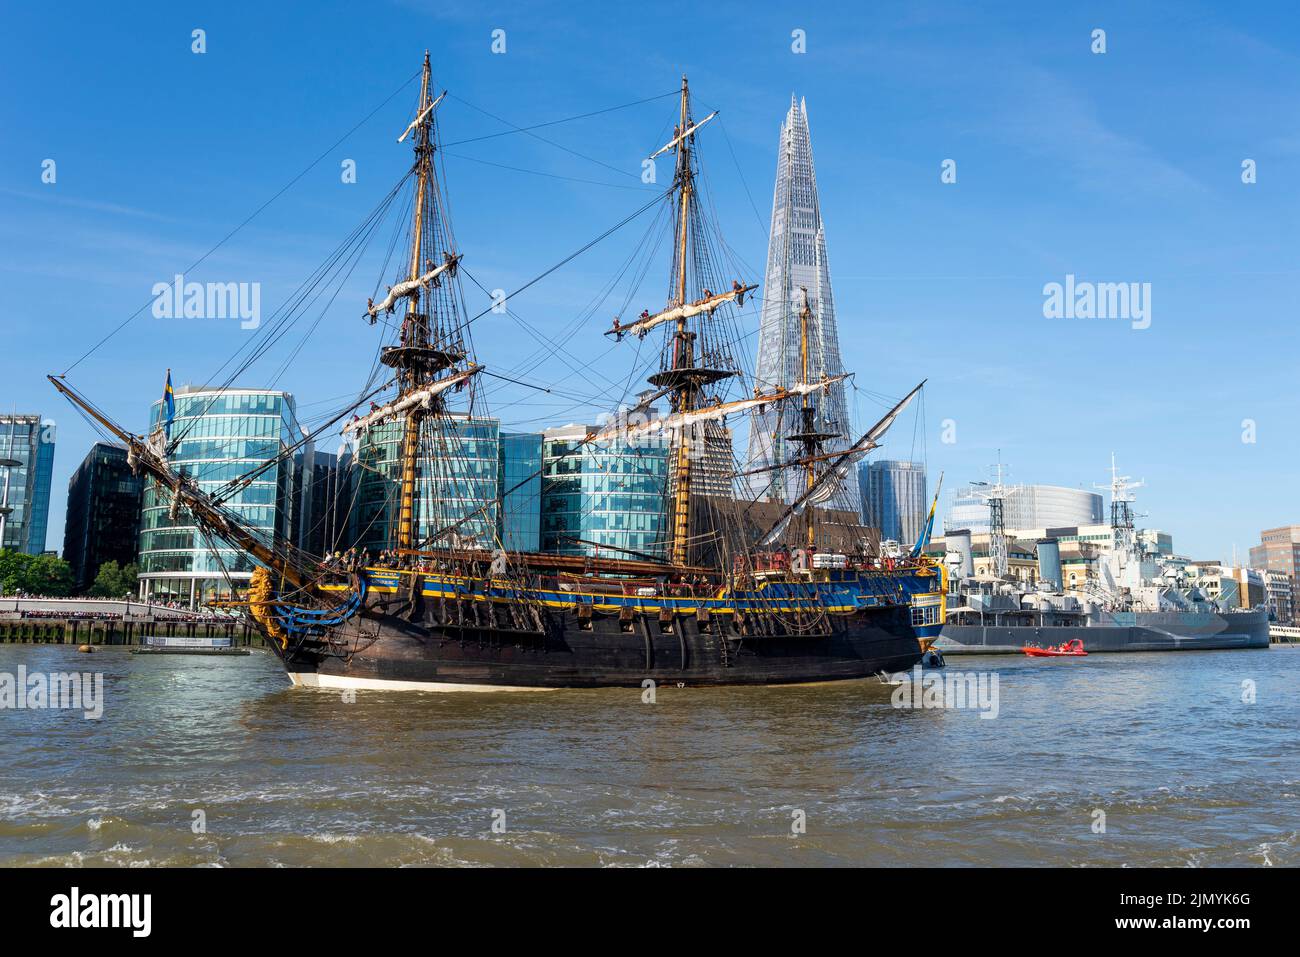 Tower Bridge, London, UK. 8th Aug, 2022. Gotheborg of Sweden is a sailing replica of the Swedish East Indiaman Gotheborg I, launched in 1738, and is visiting London to welcome visitors on board. The wooden replica ship was launched in 2003 and last visited London in 2007. It has navigated up the River Thames in the morning to pass under the opened Tower Bridge before turning and passing back under and heading for Thames Quay in Canary Wharf, where it will be open to visitors. Passing HMS Belfast, The Shard and More London buildings Stock Photo